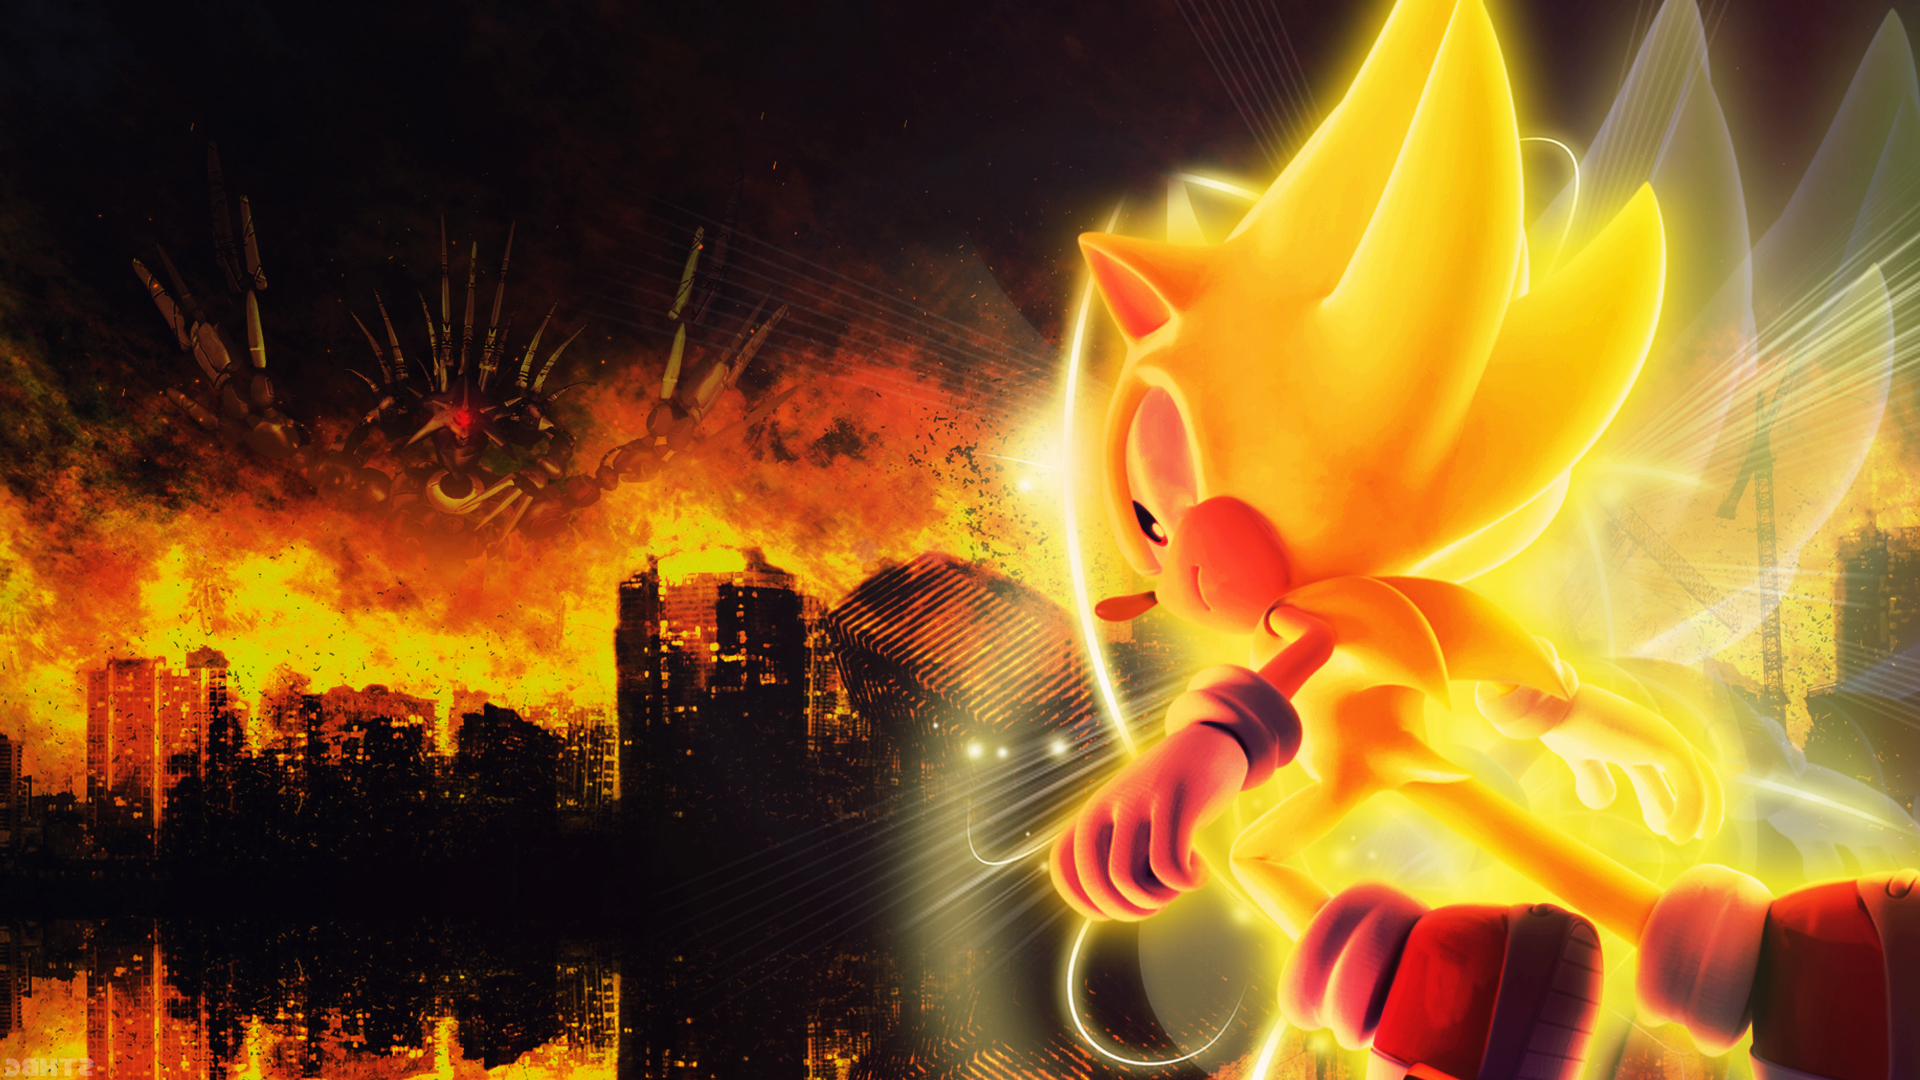 Super Sonic Vs Metal Overlord Wallpaper By